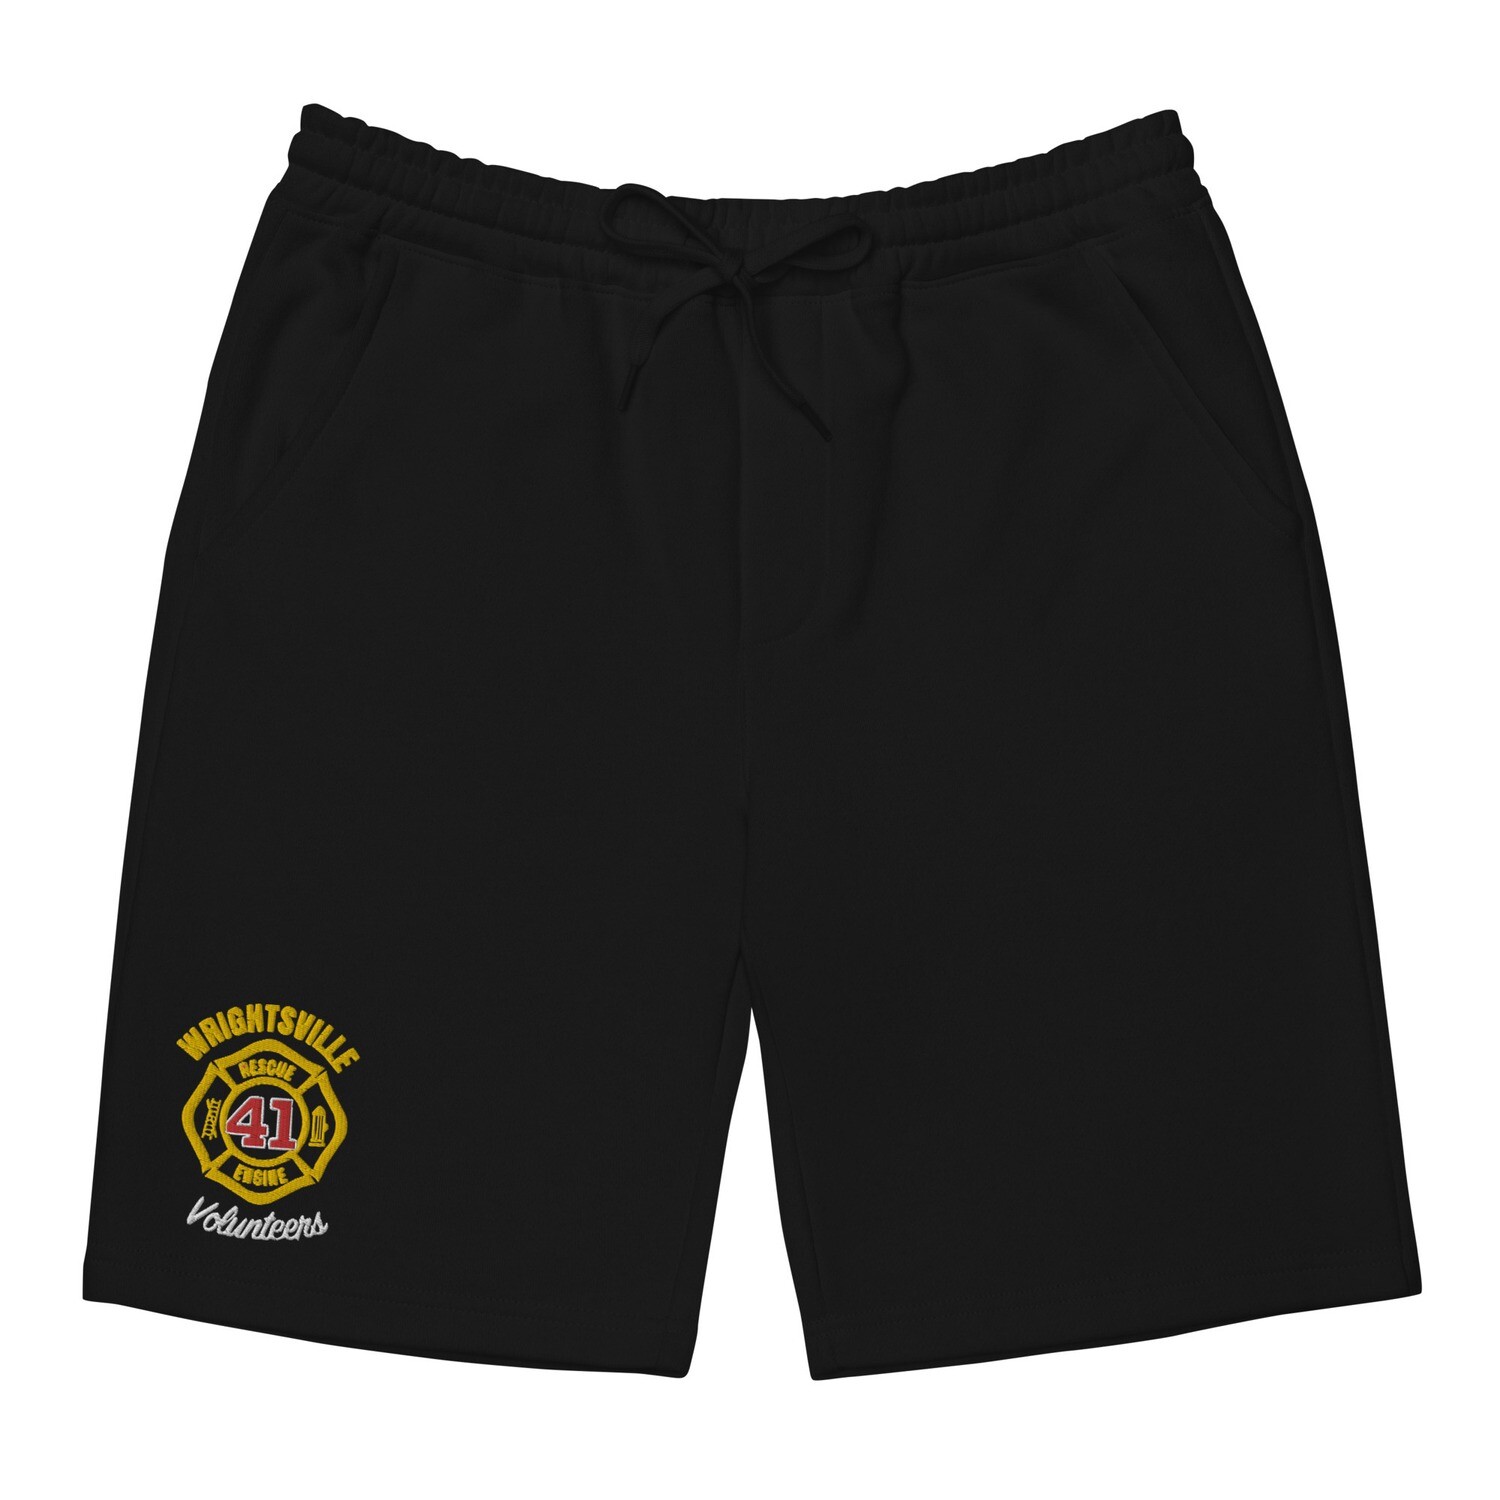 Wrightsville FD embroidered fleece shorts